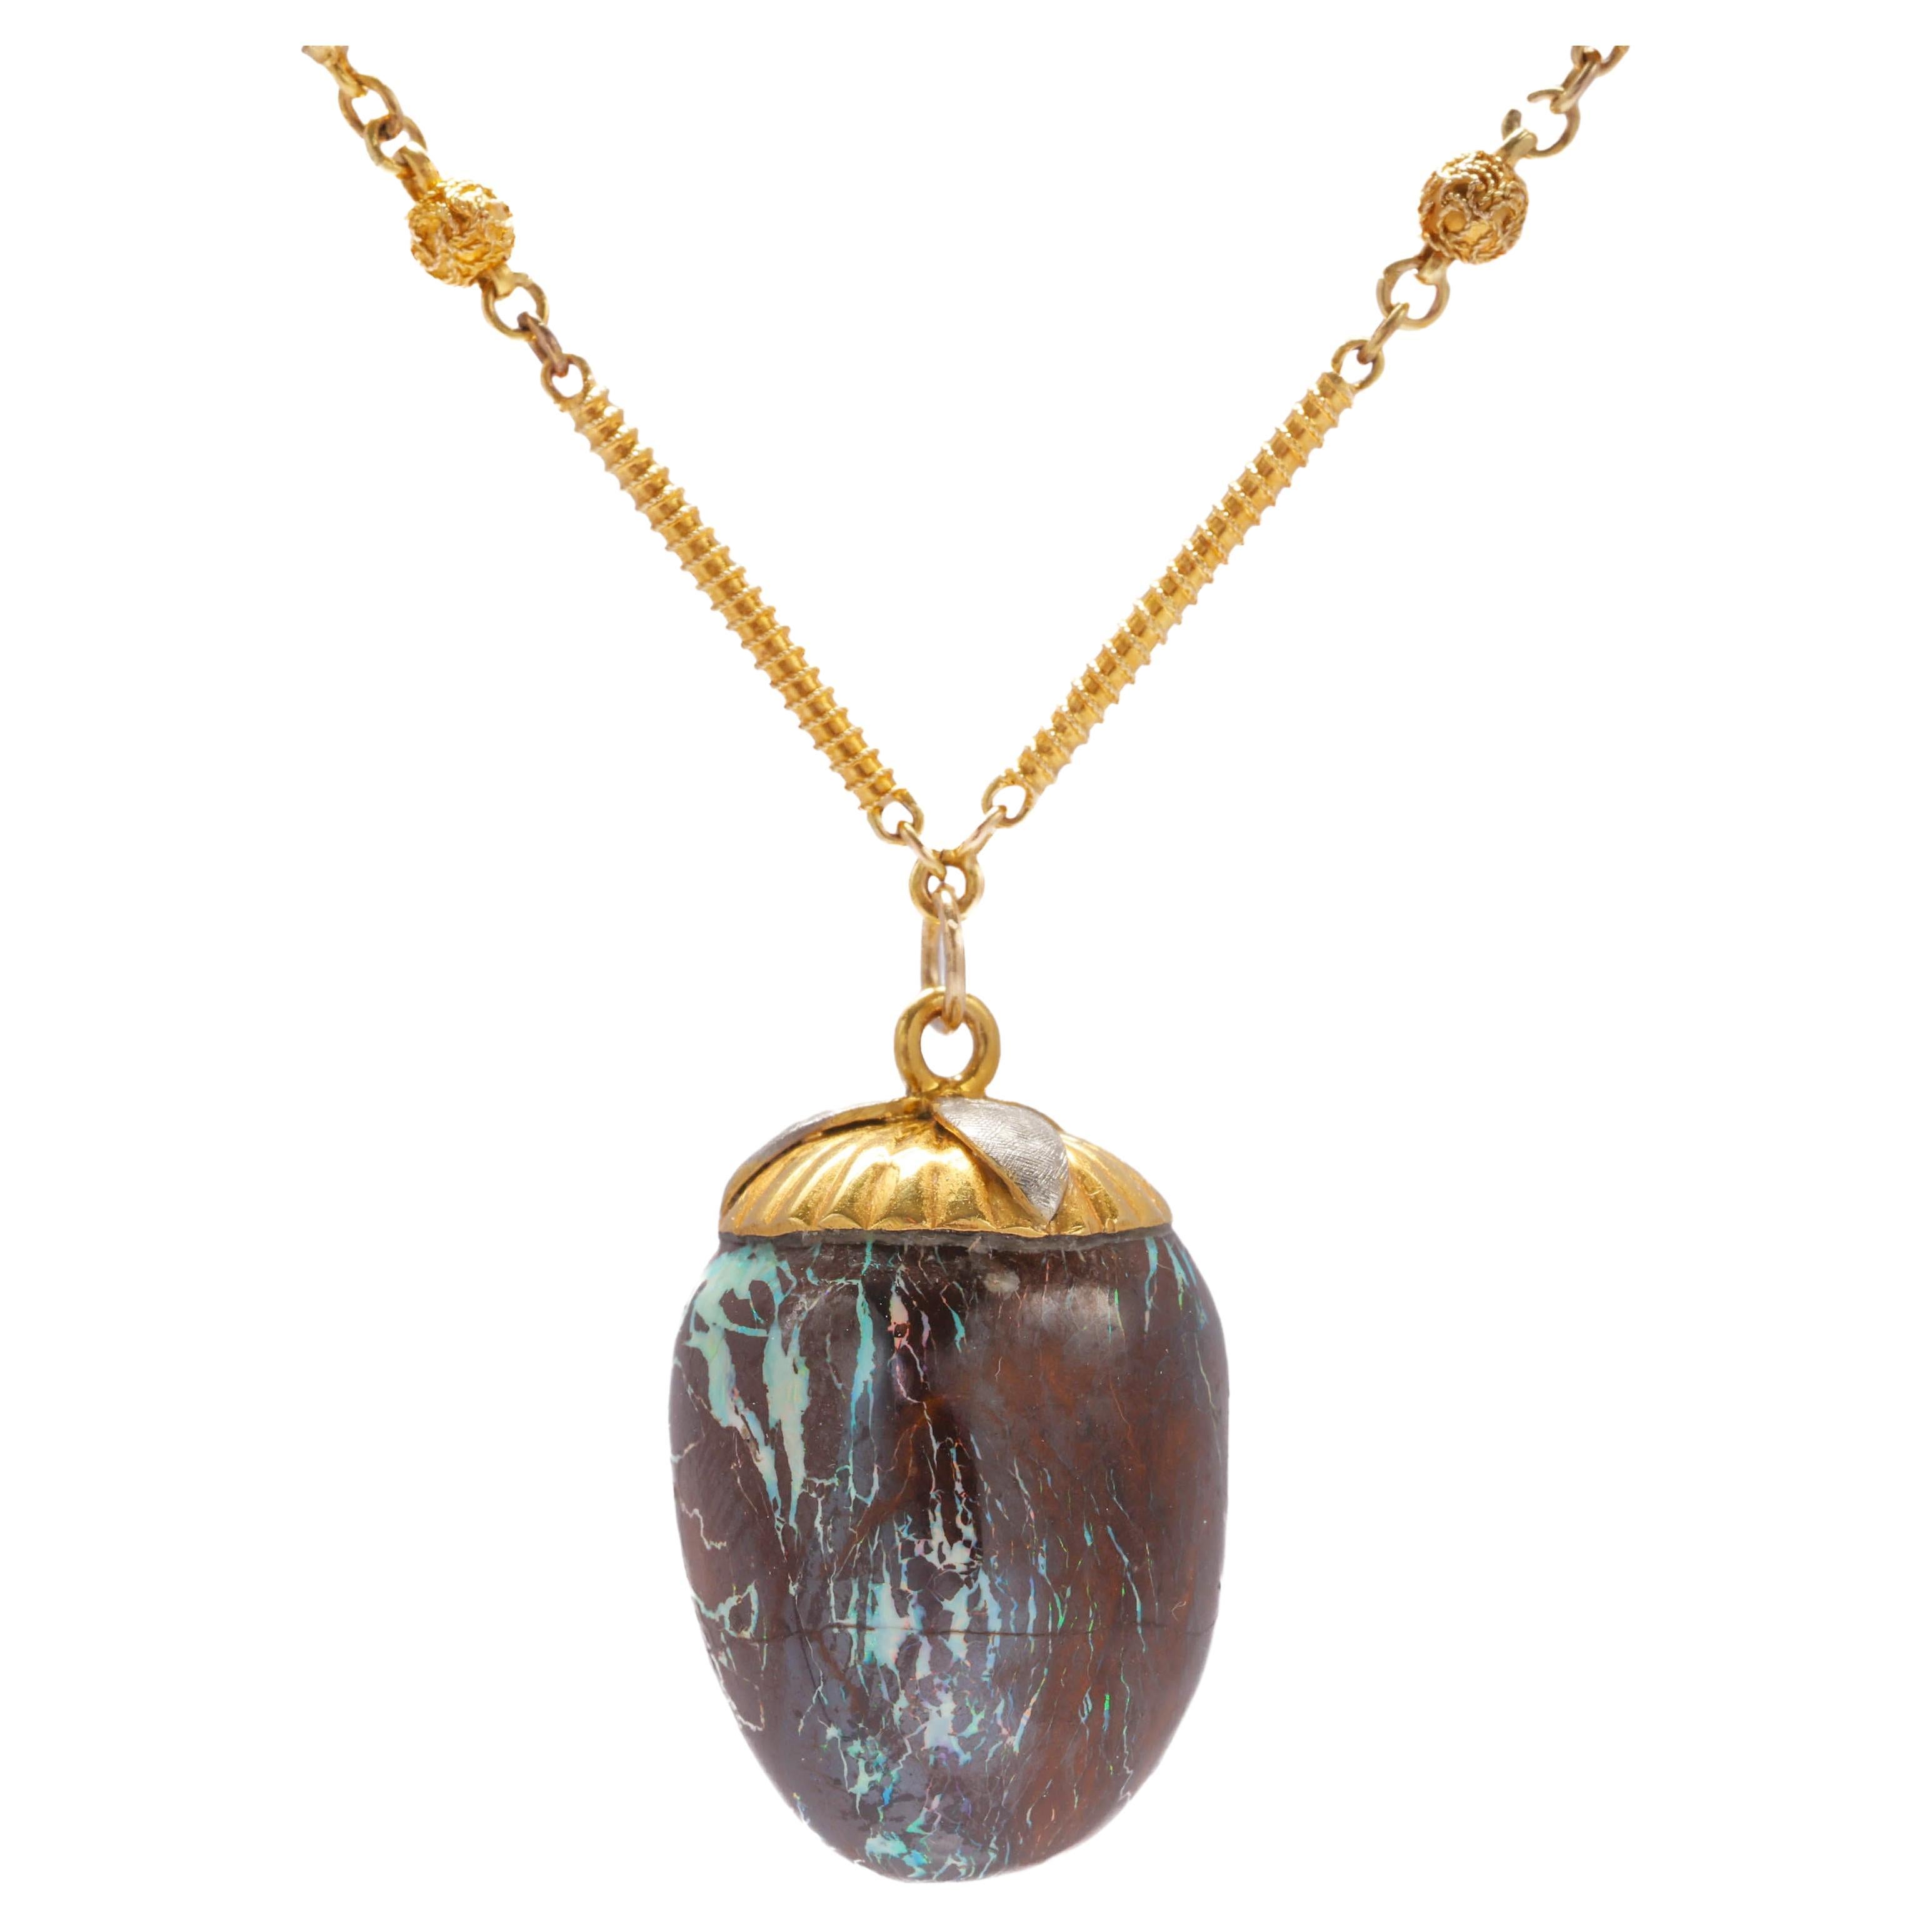 Opal Pendant with Chain, Boulder Opal, Circa 1940s